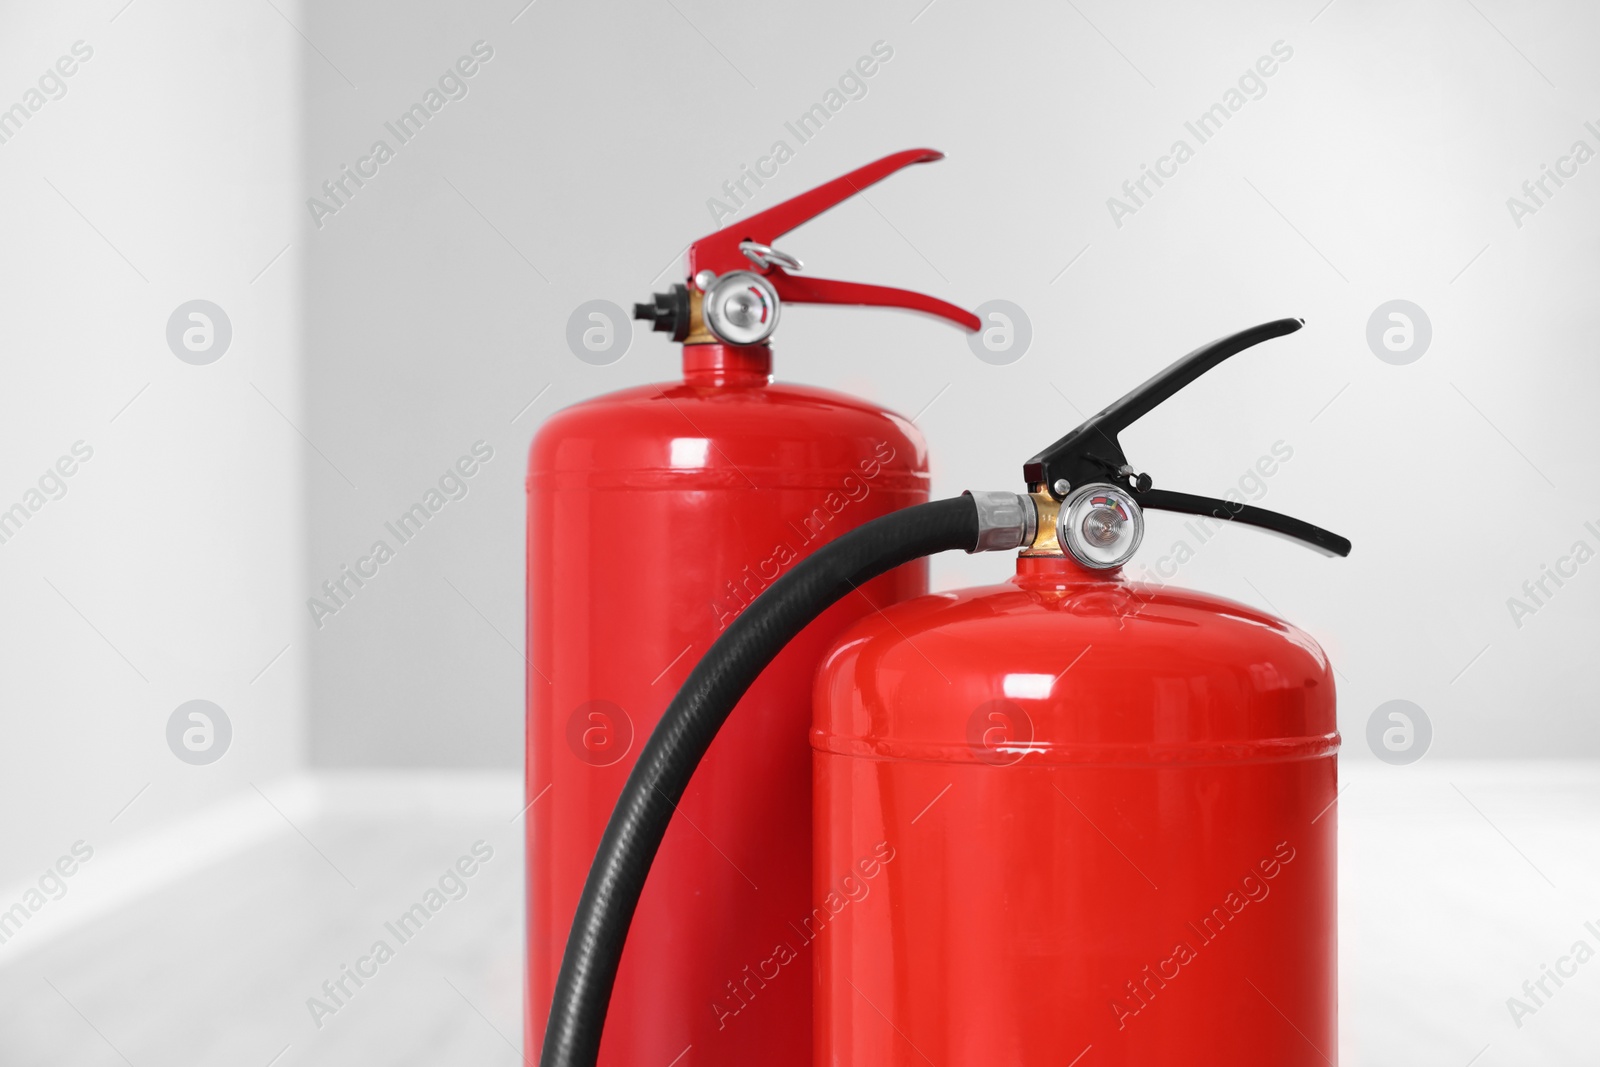 Photo of Two red fire extinguishers indoors, closeup view